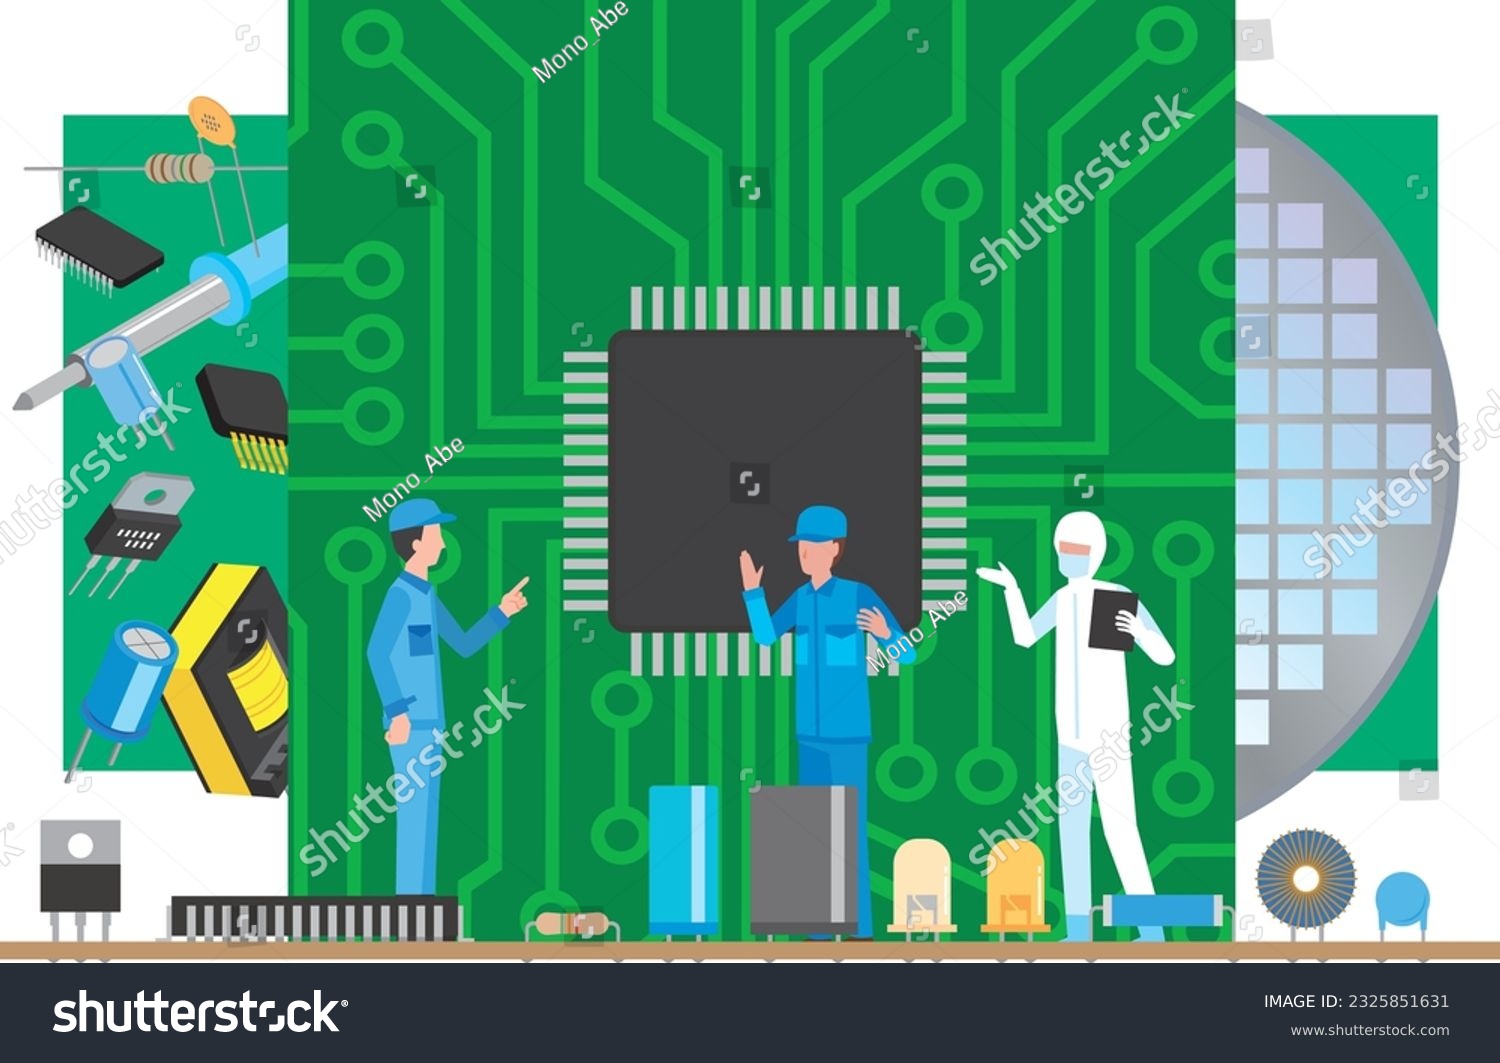 SVG of Image illustration of semiconductors and electronic components svg